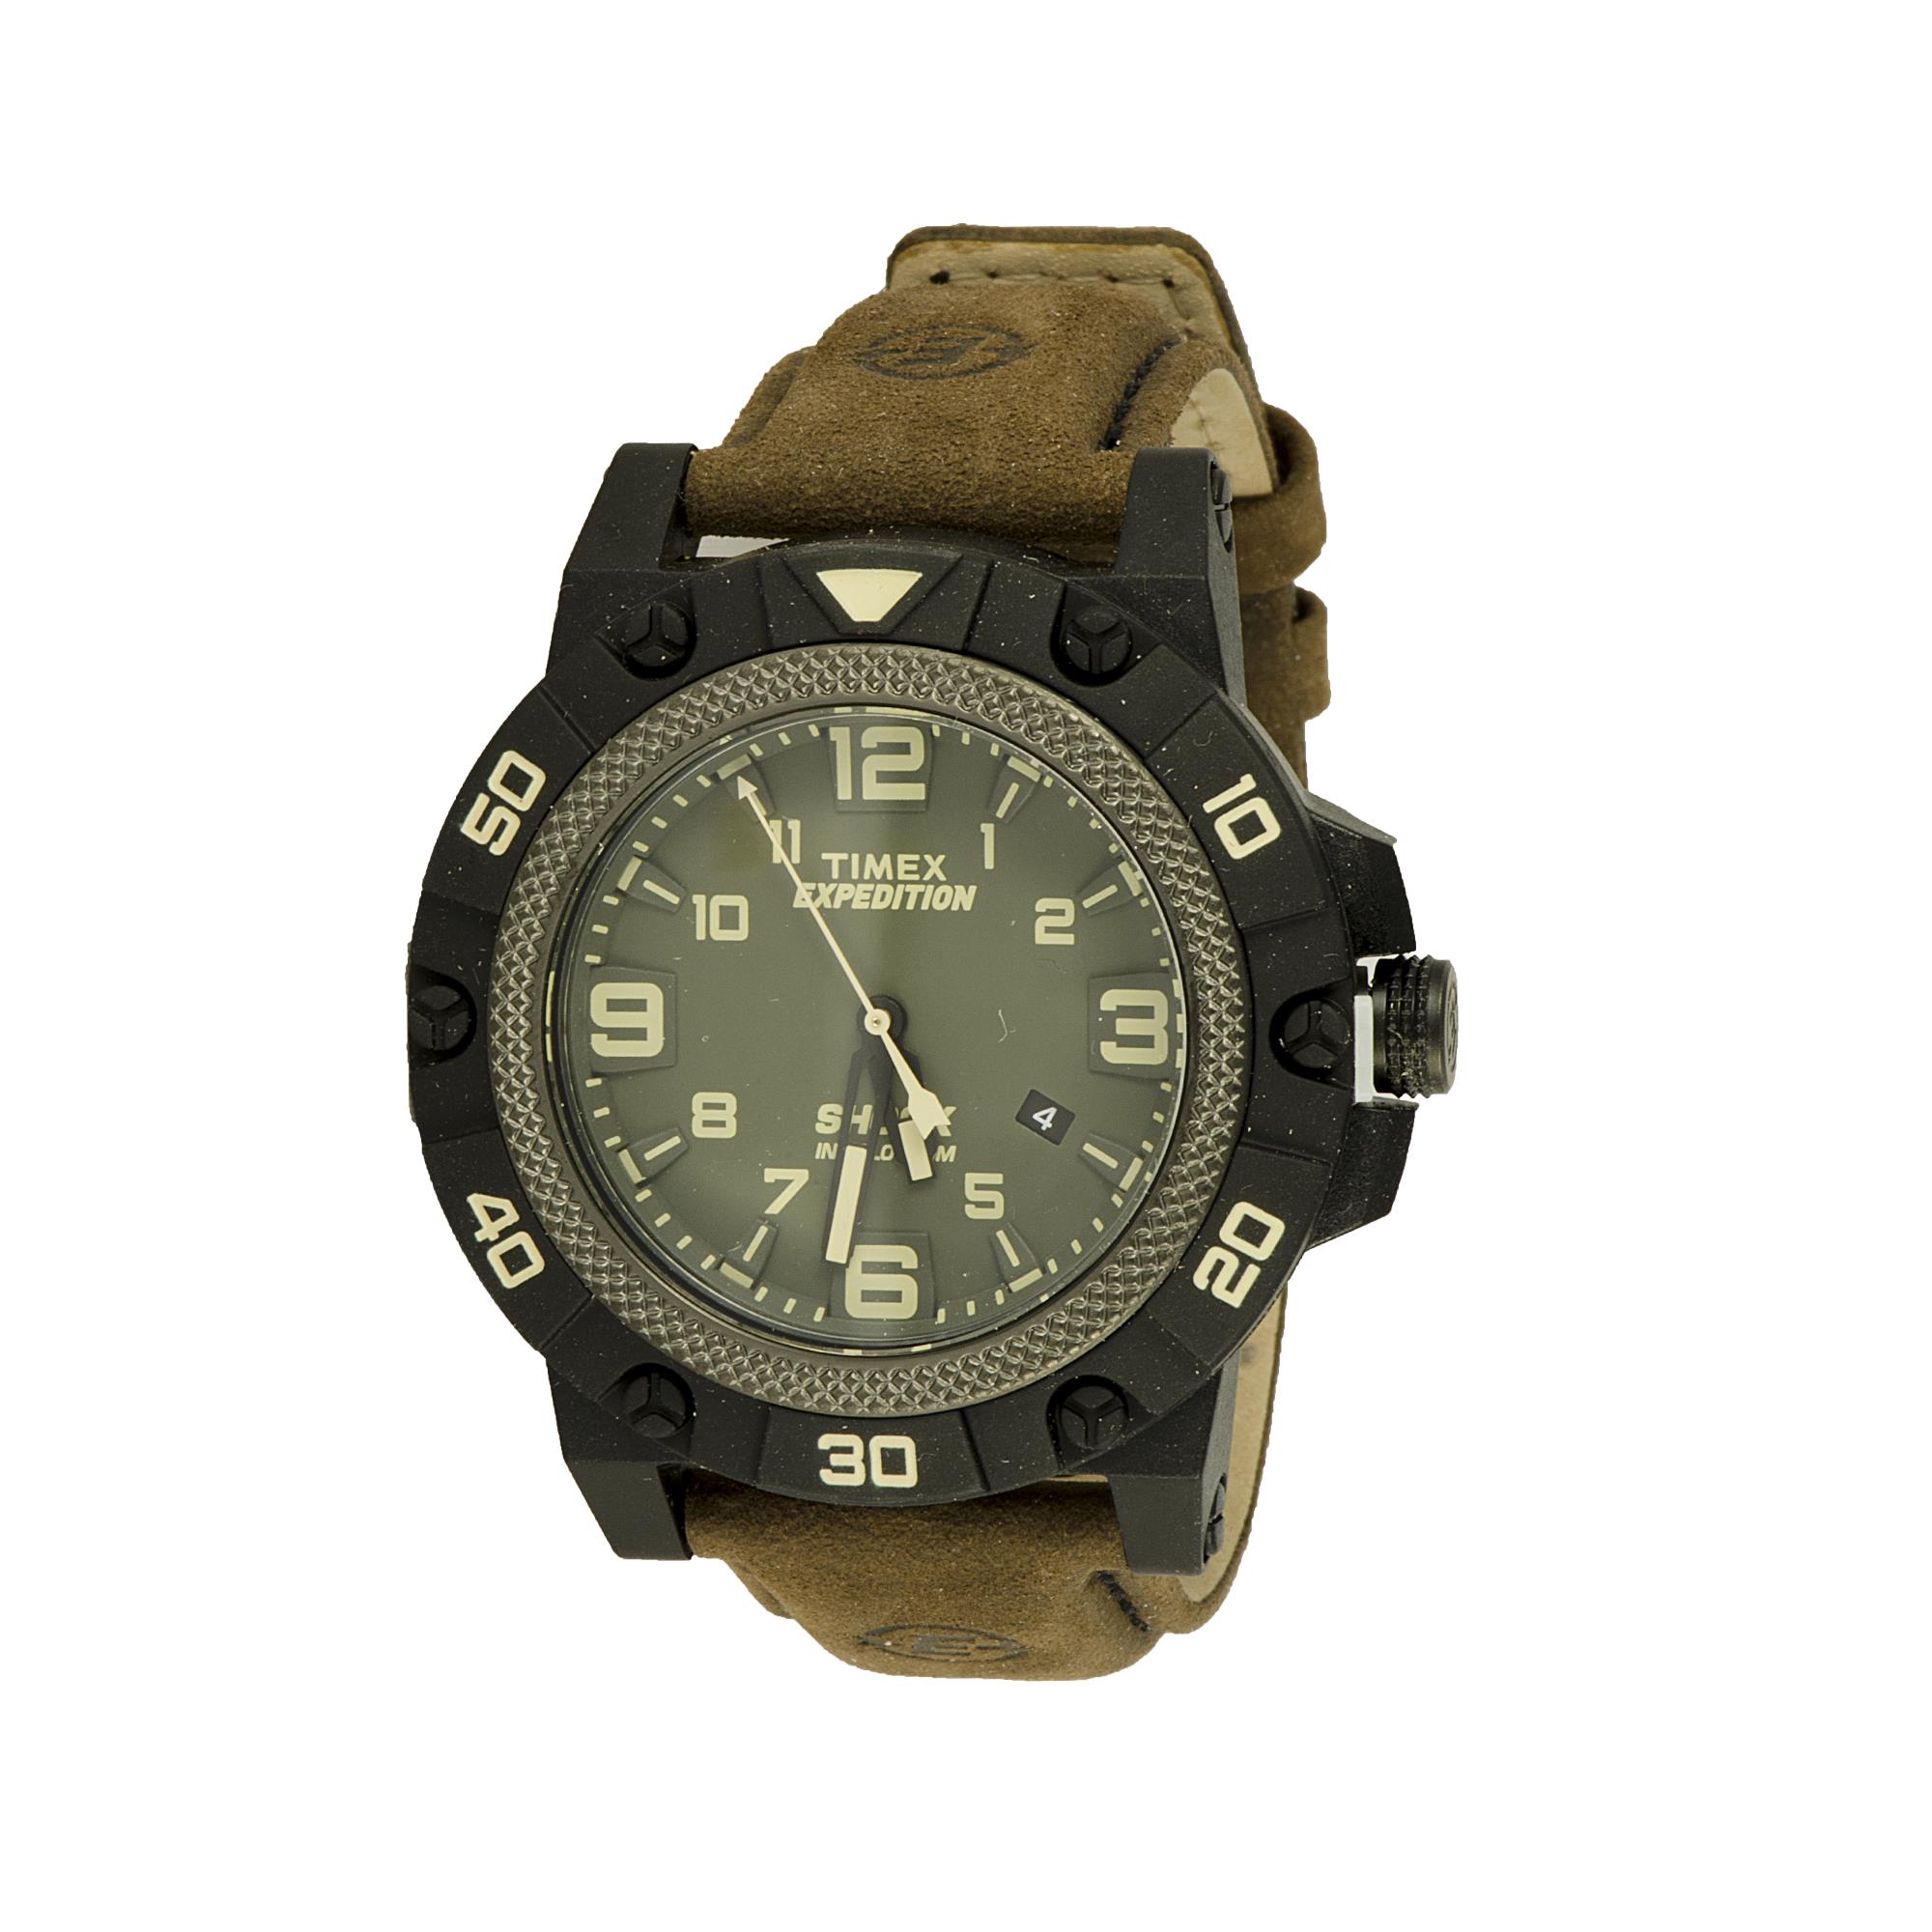 OROLOGIO EXPEDITION FIELD SHOCK 46 MM - TIMEX